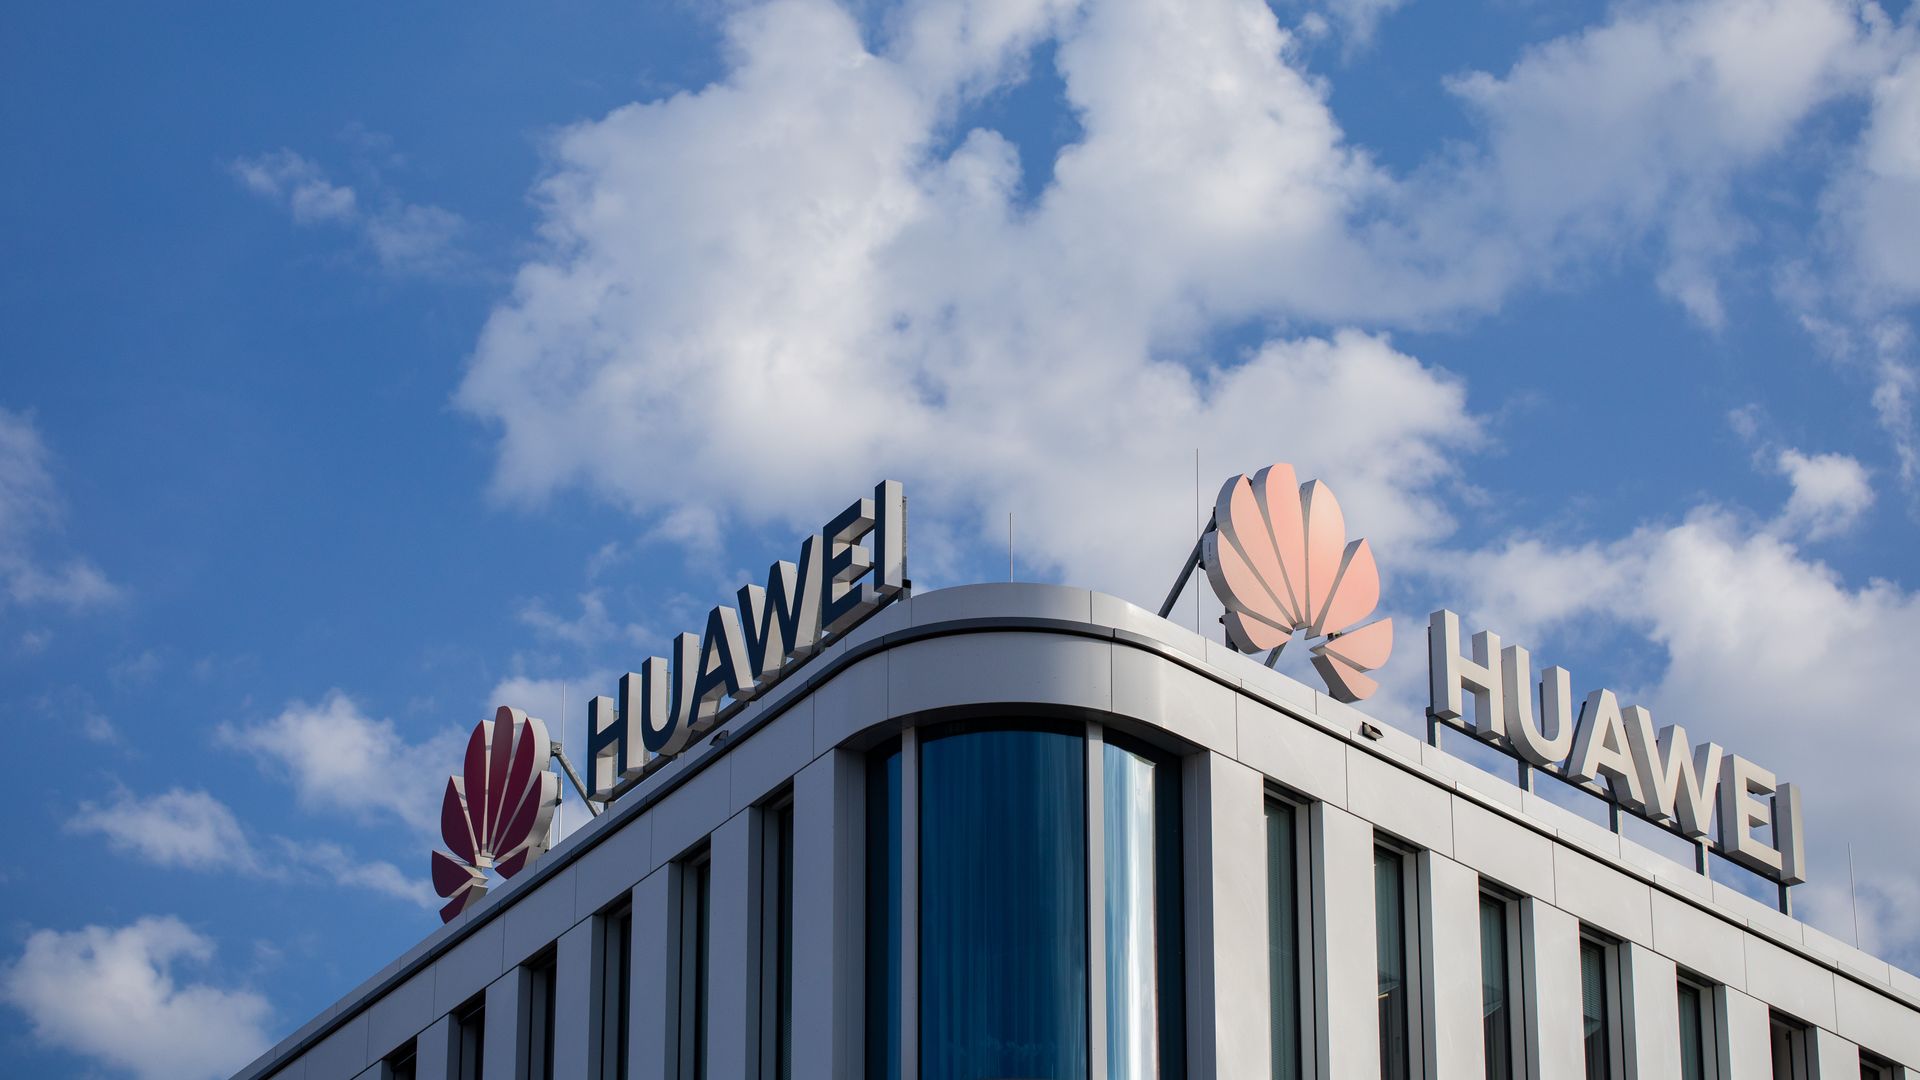 This image shows a rooftop with two Huawei logos on either side of its roof